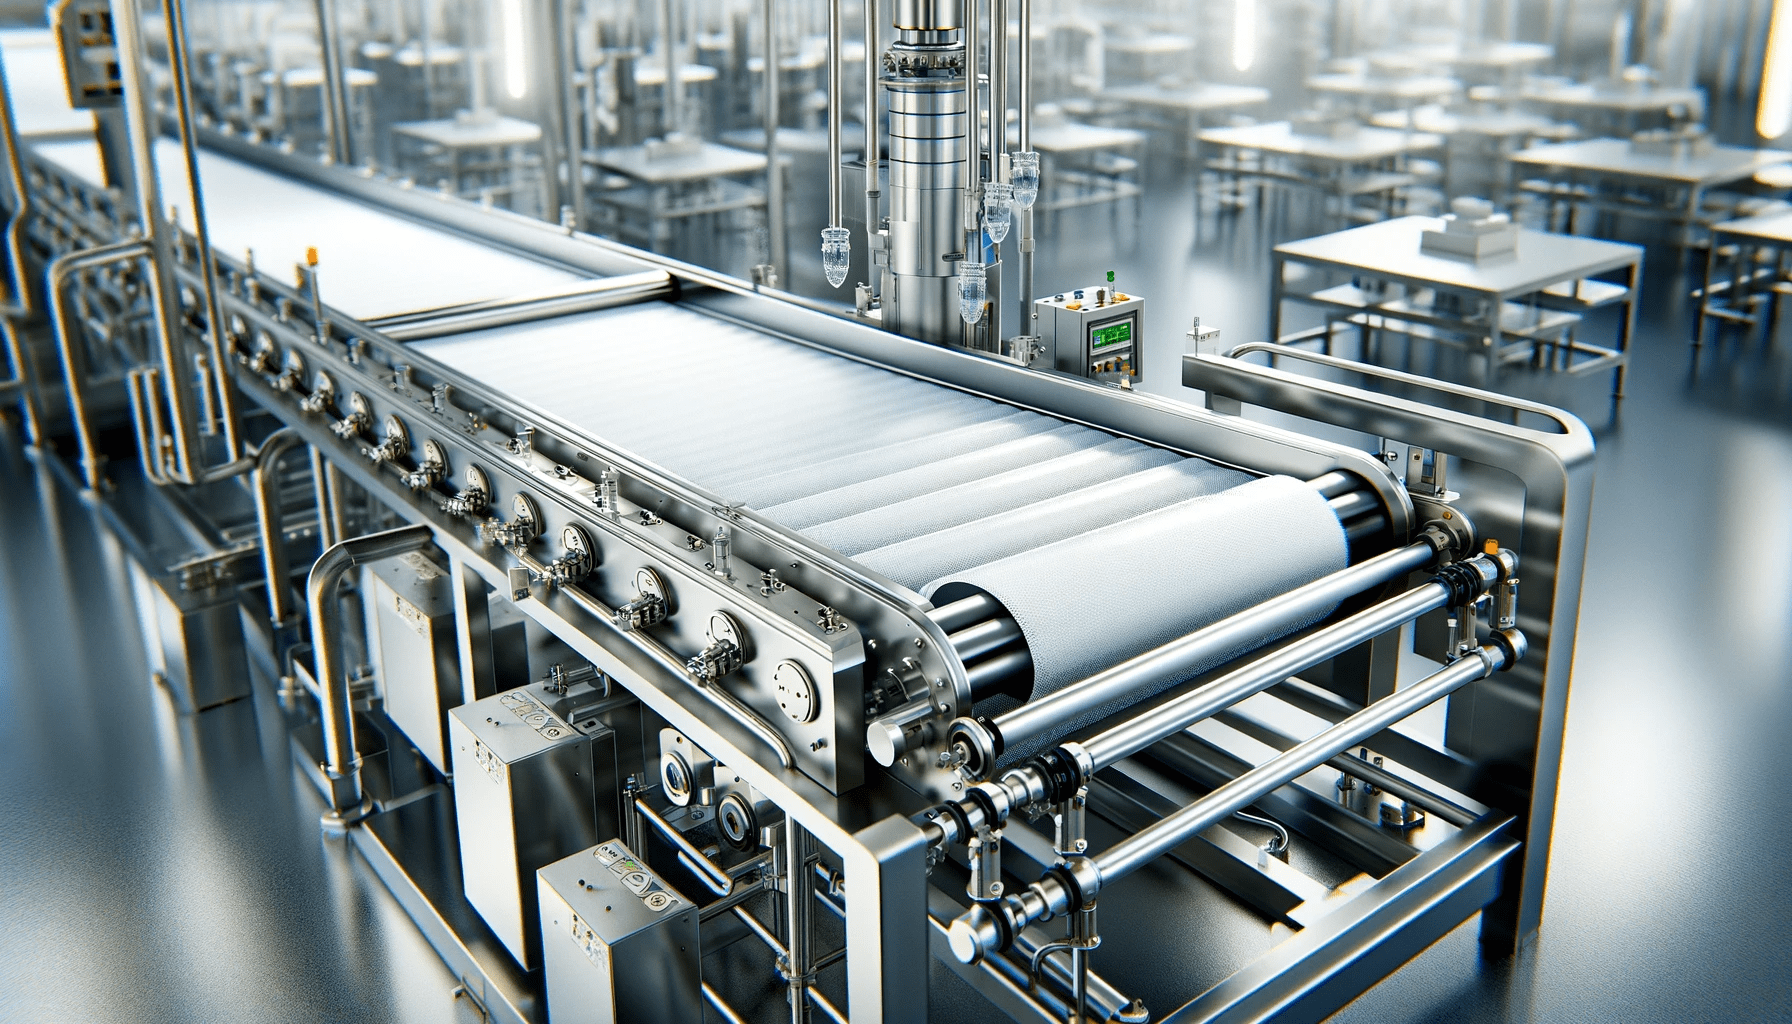 A modern, hygienic conveyor system designed for the food industry. This system features a sleek, stainless steel construction